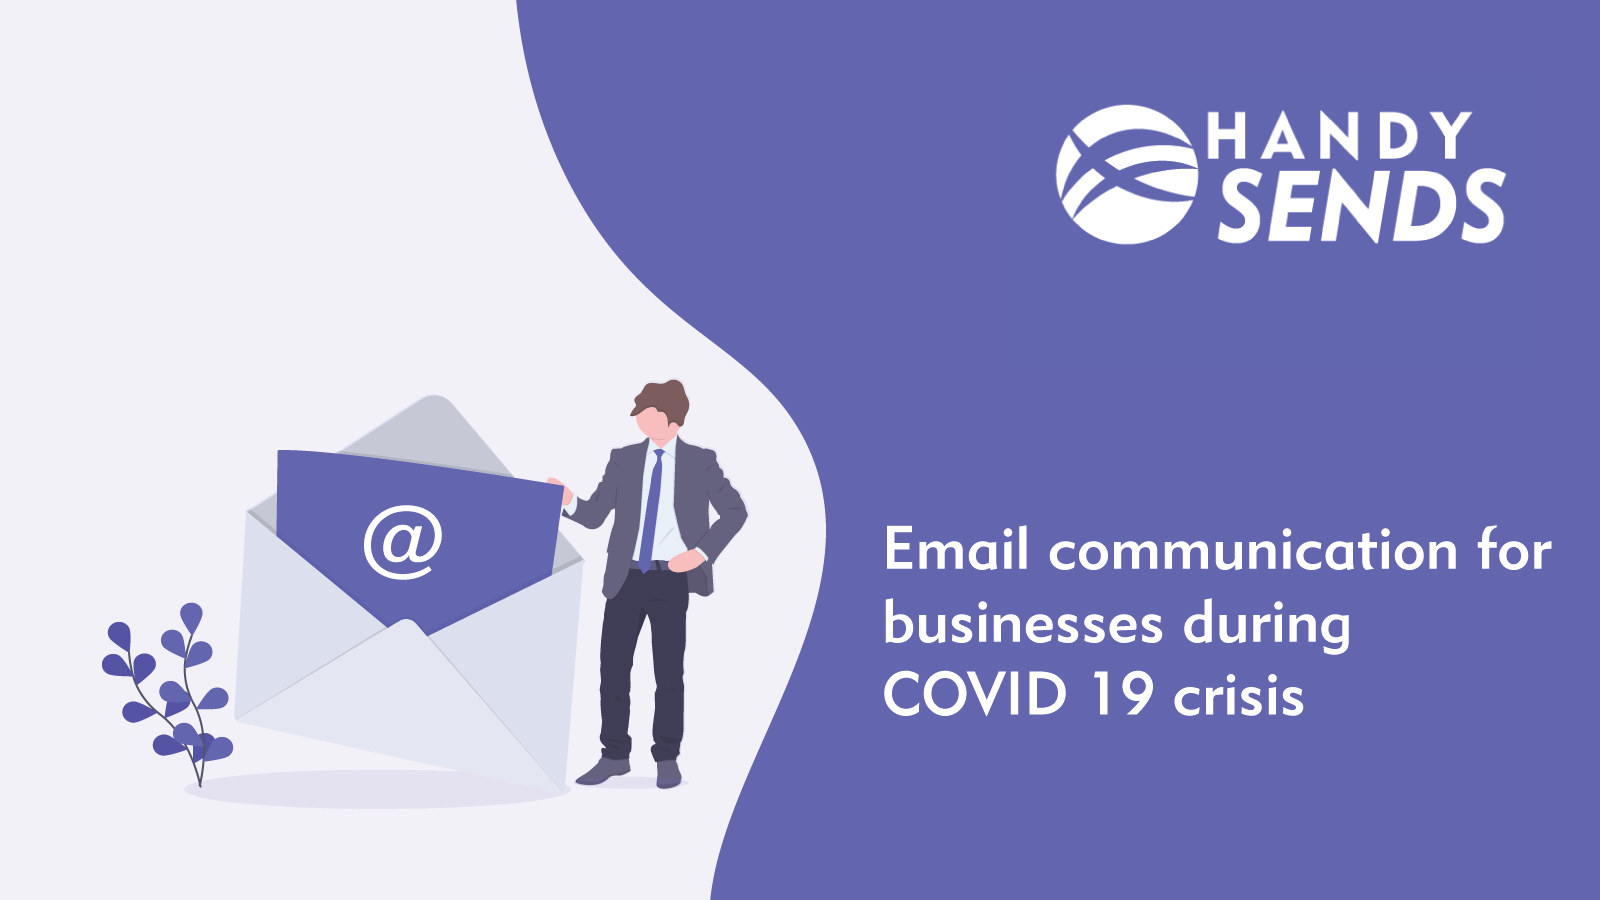 Email communication for businesses during COVID 19 crisis